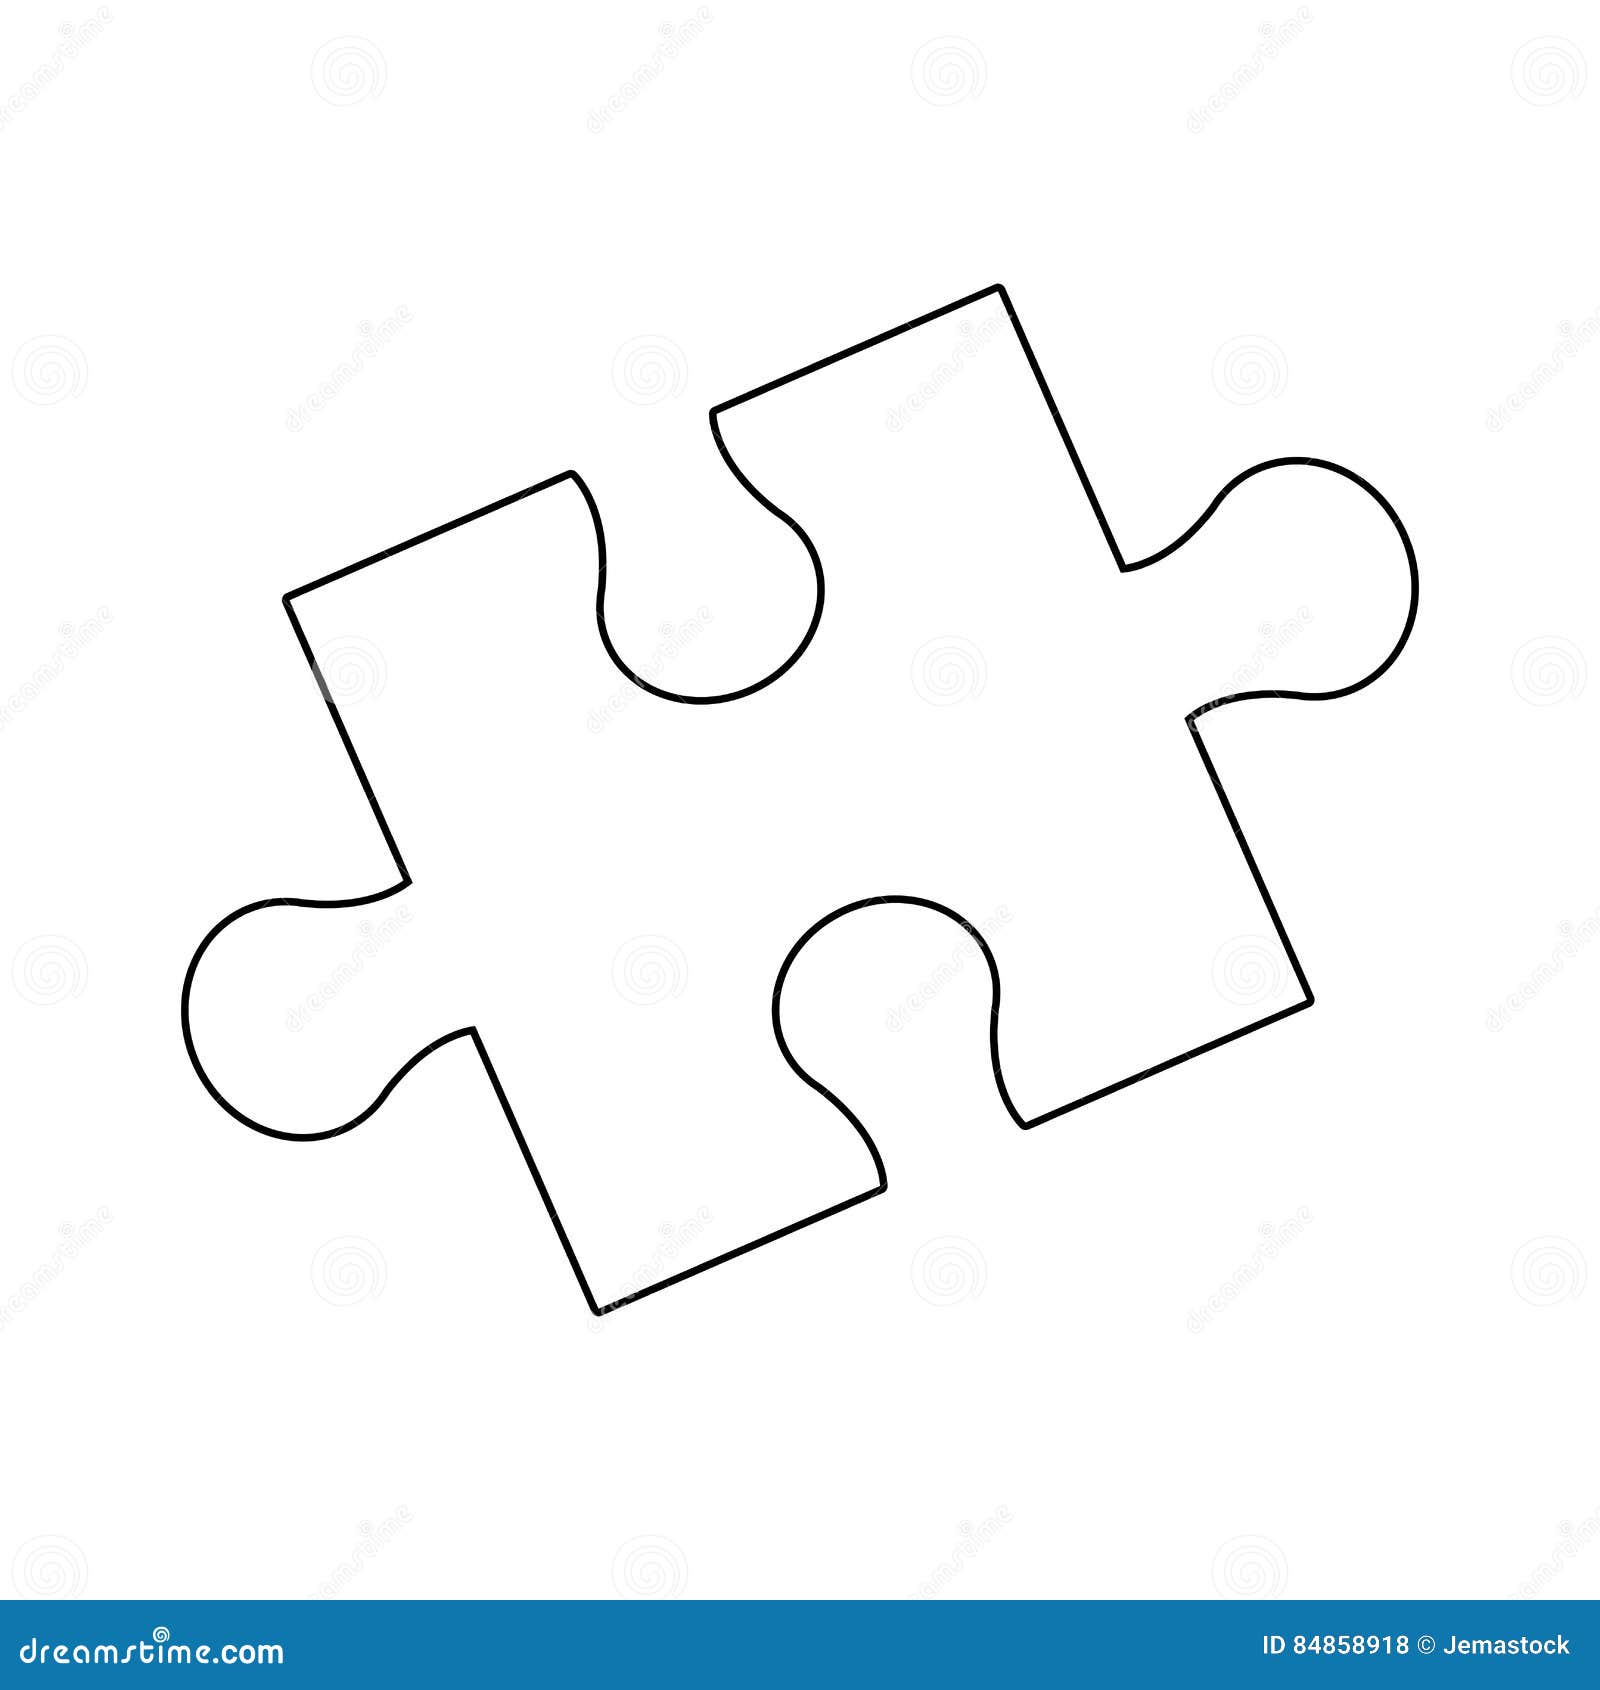 Jigsaw puzzle icon stock vector. Illustration of match - 84858918